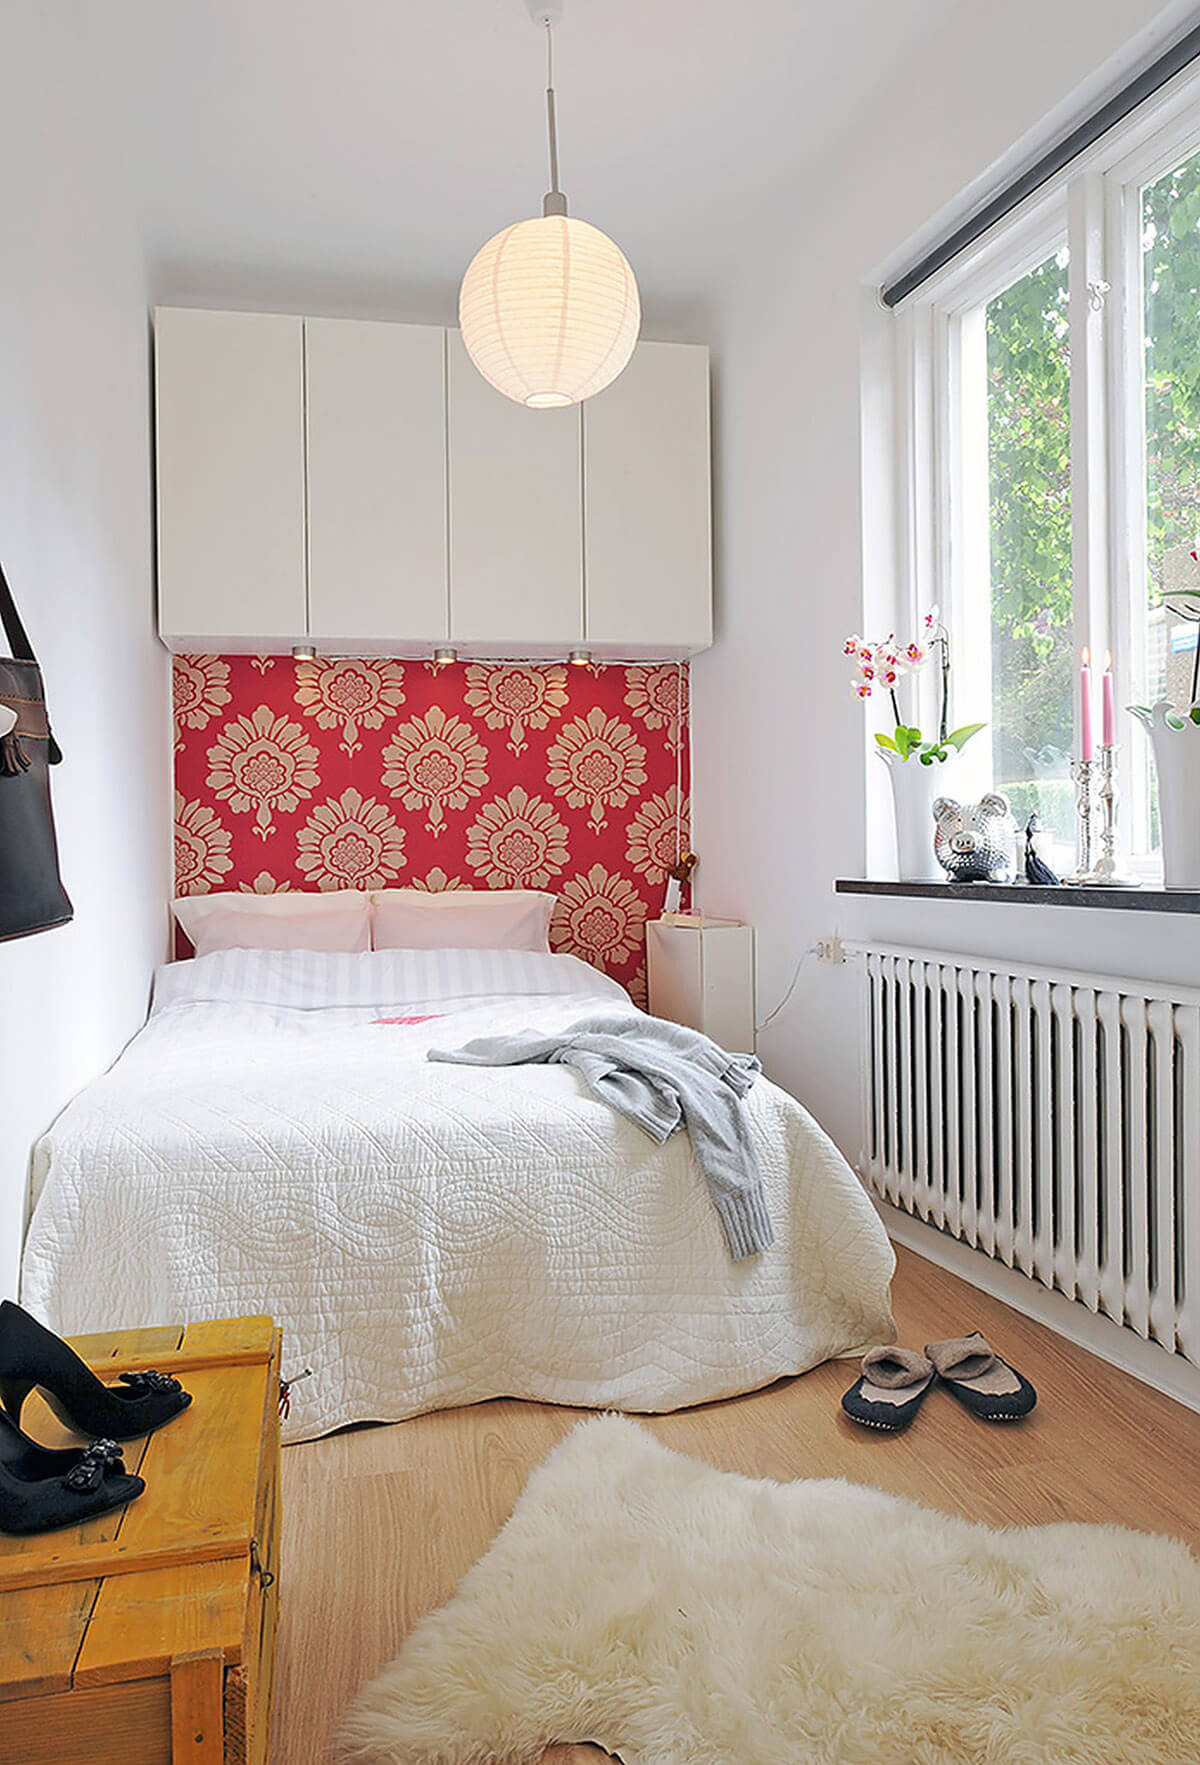 Minimalism In Miniature: Adopting A Less is More Approach In Small Rooms